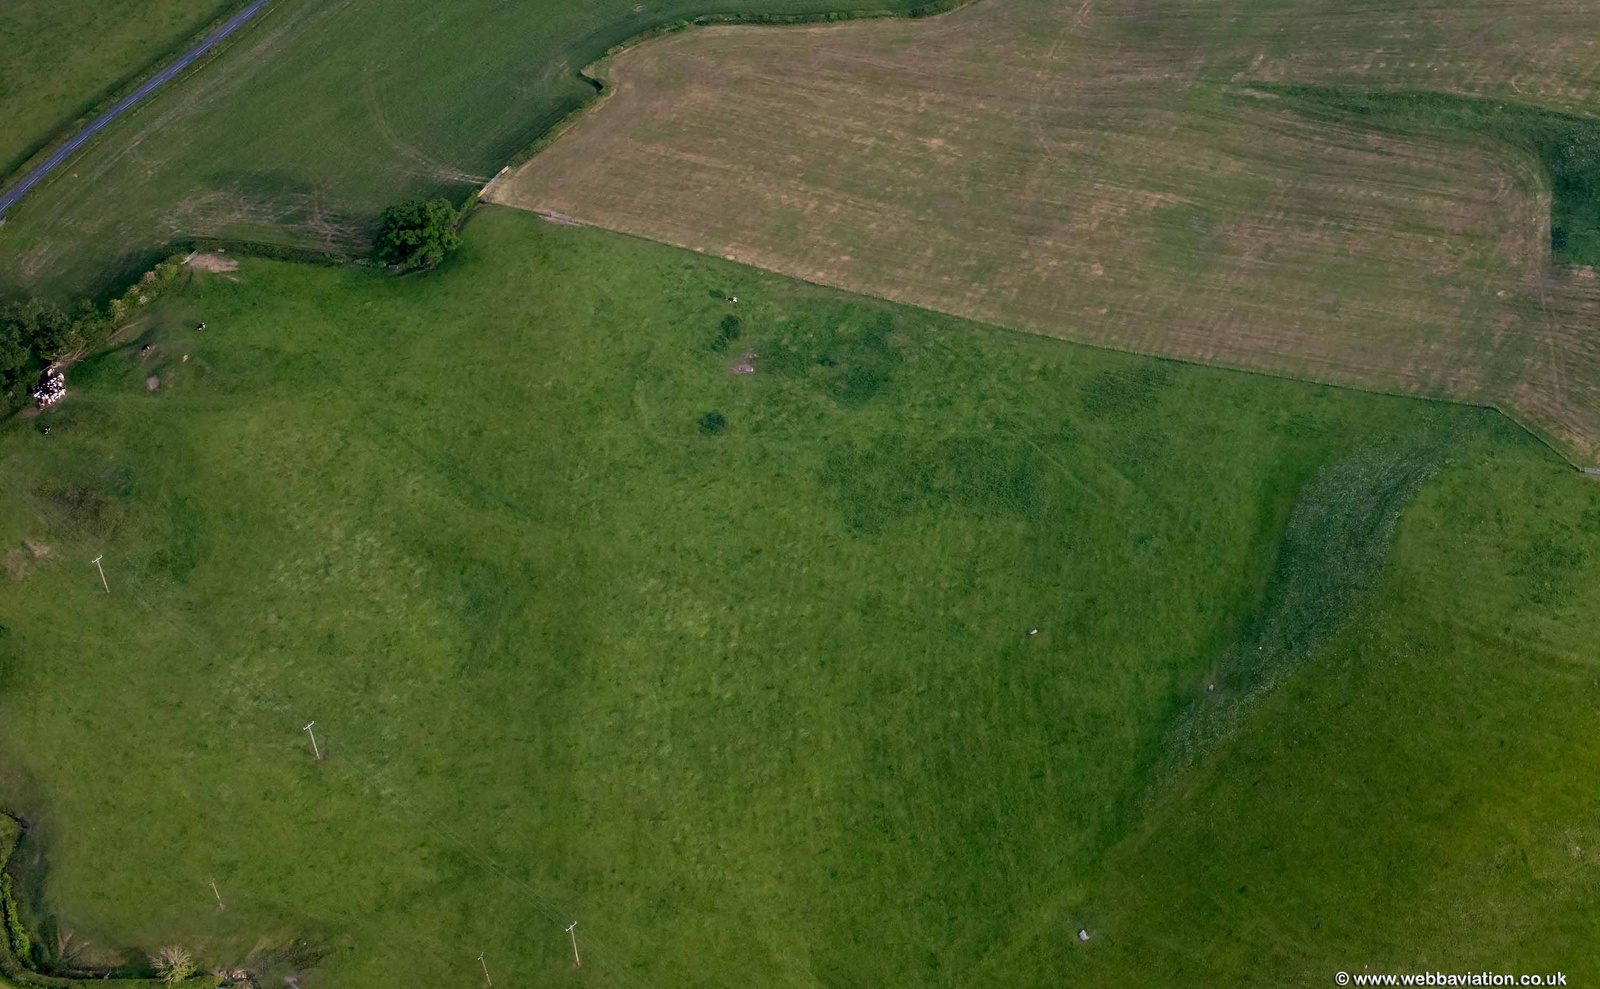 Sellet Bank prehistoric defended enclosure from the air